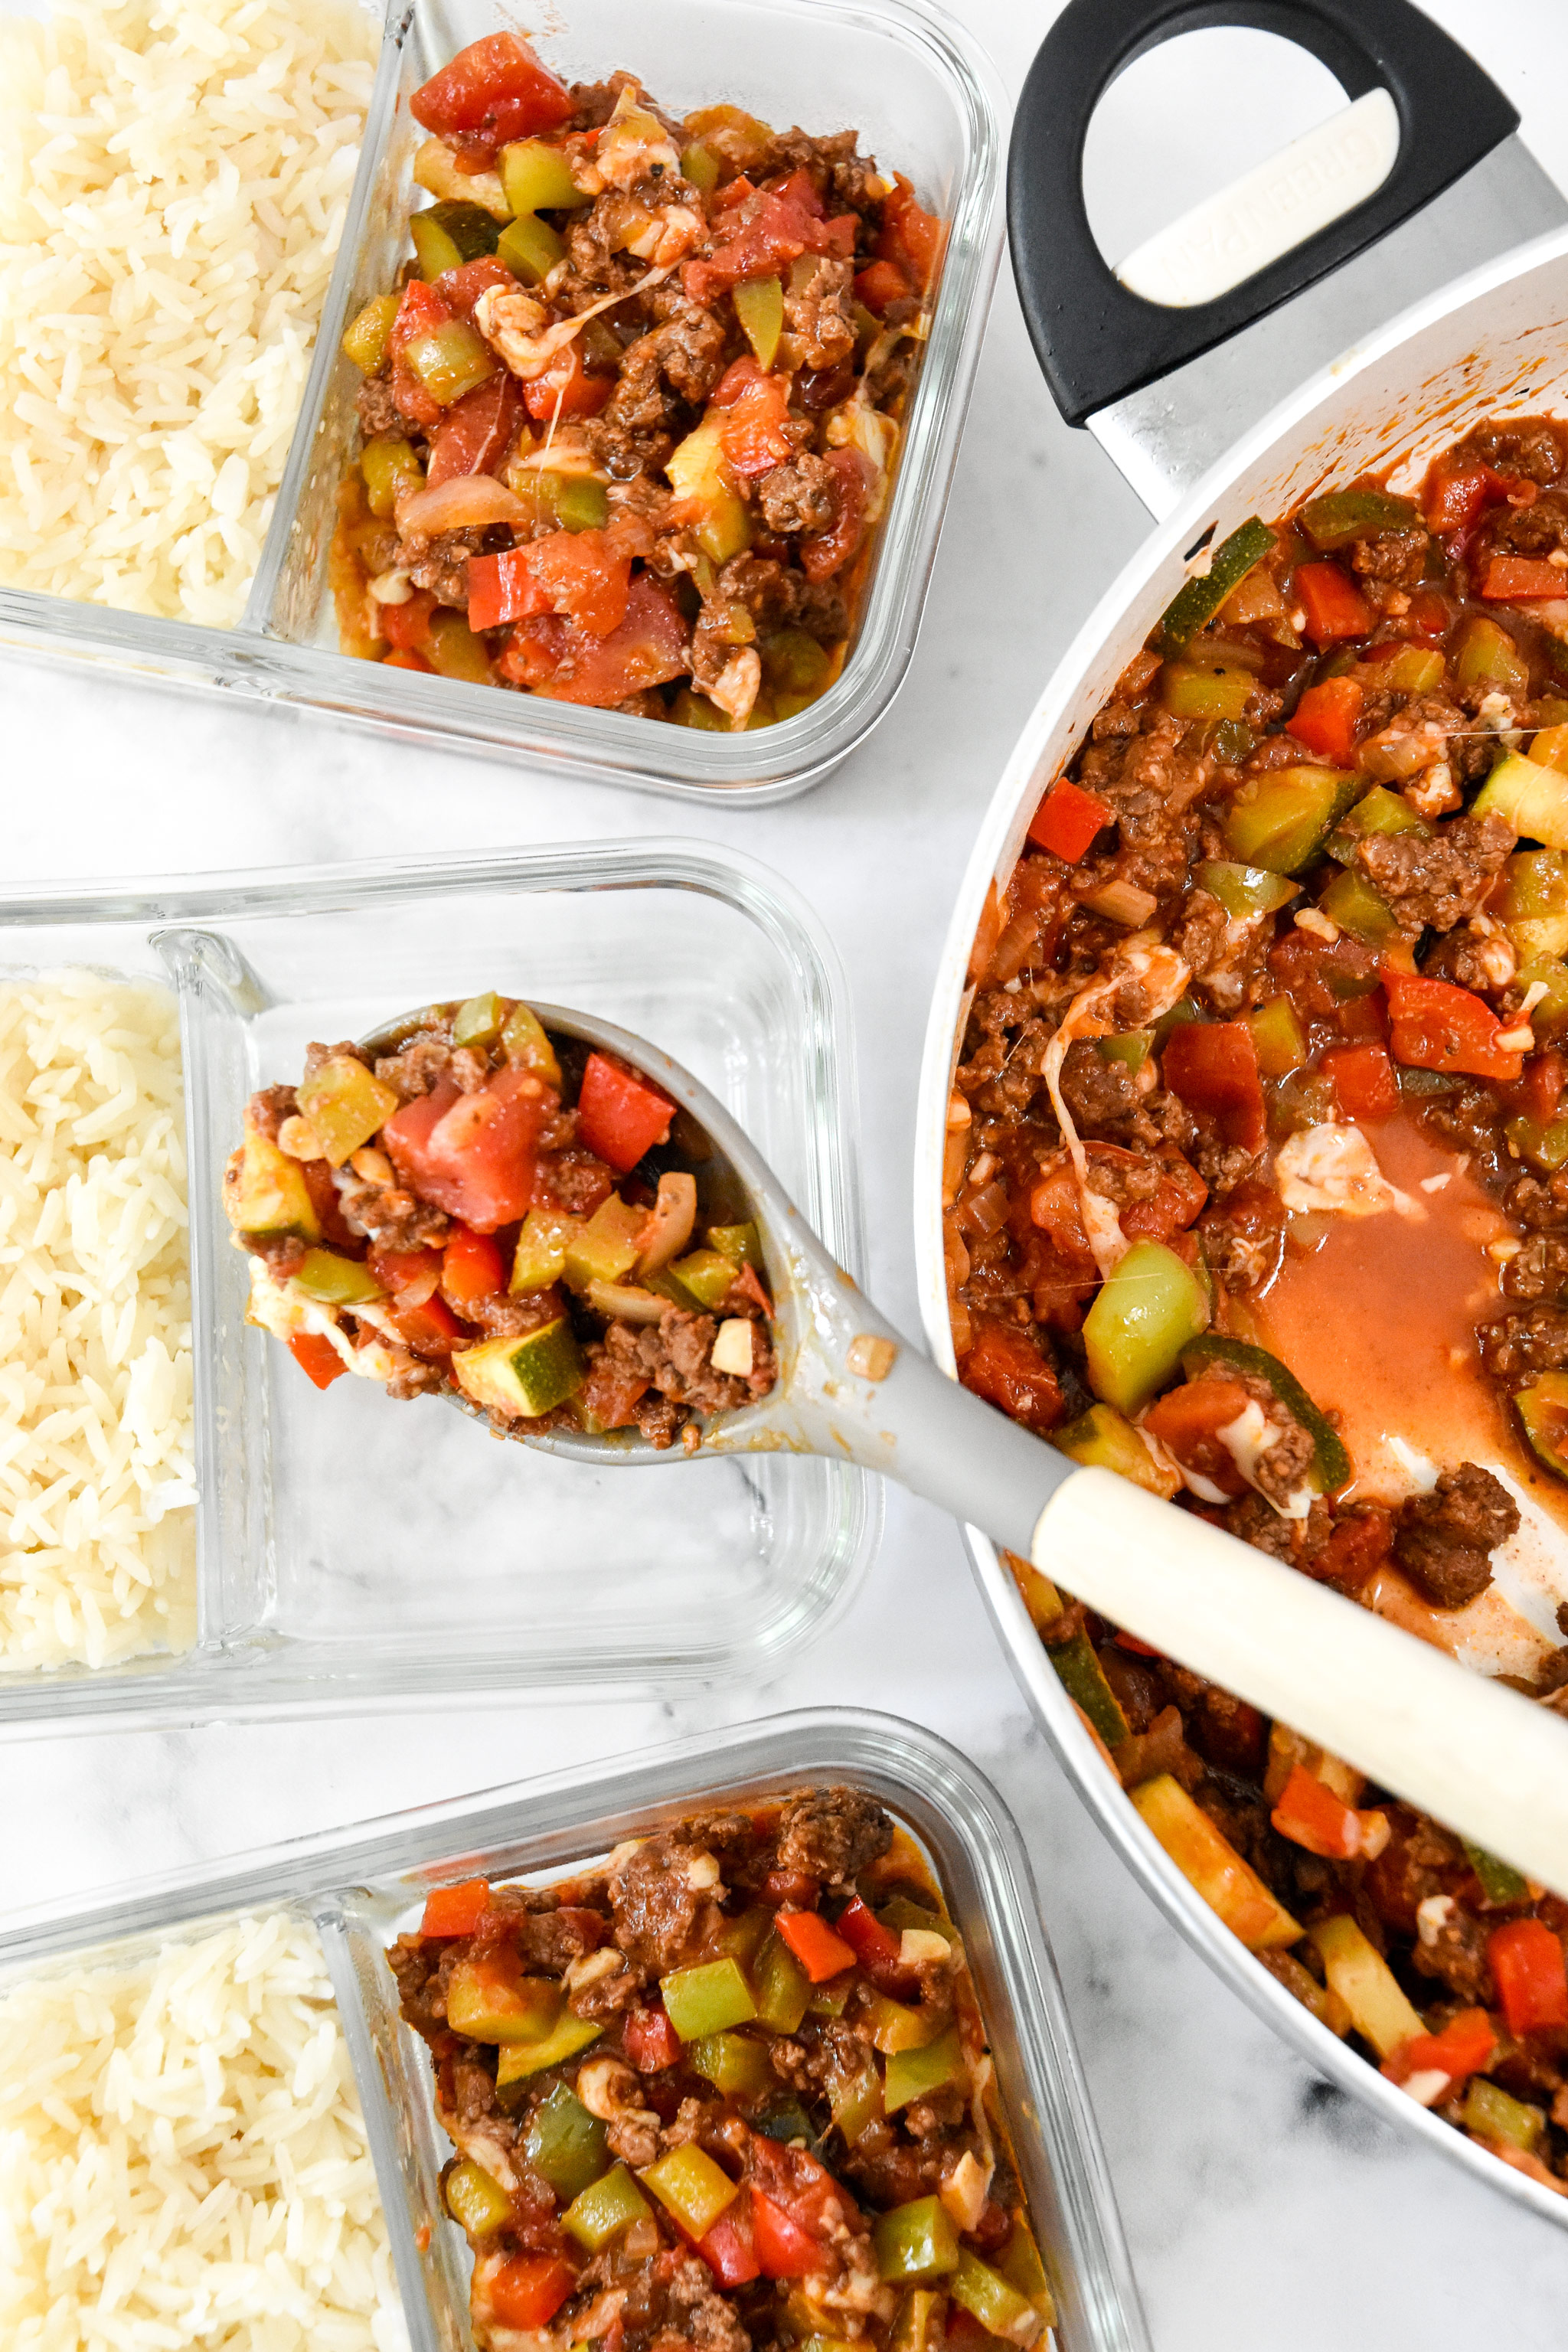 spooning unstuffed pepper mixture into the glass meal prep containers.